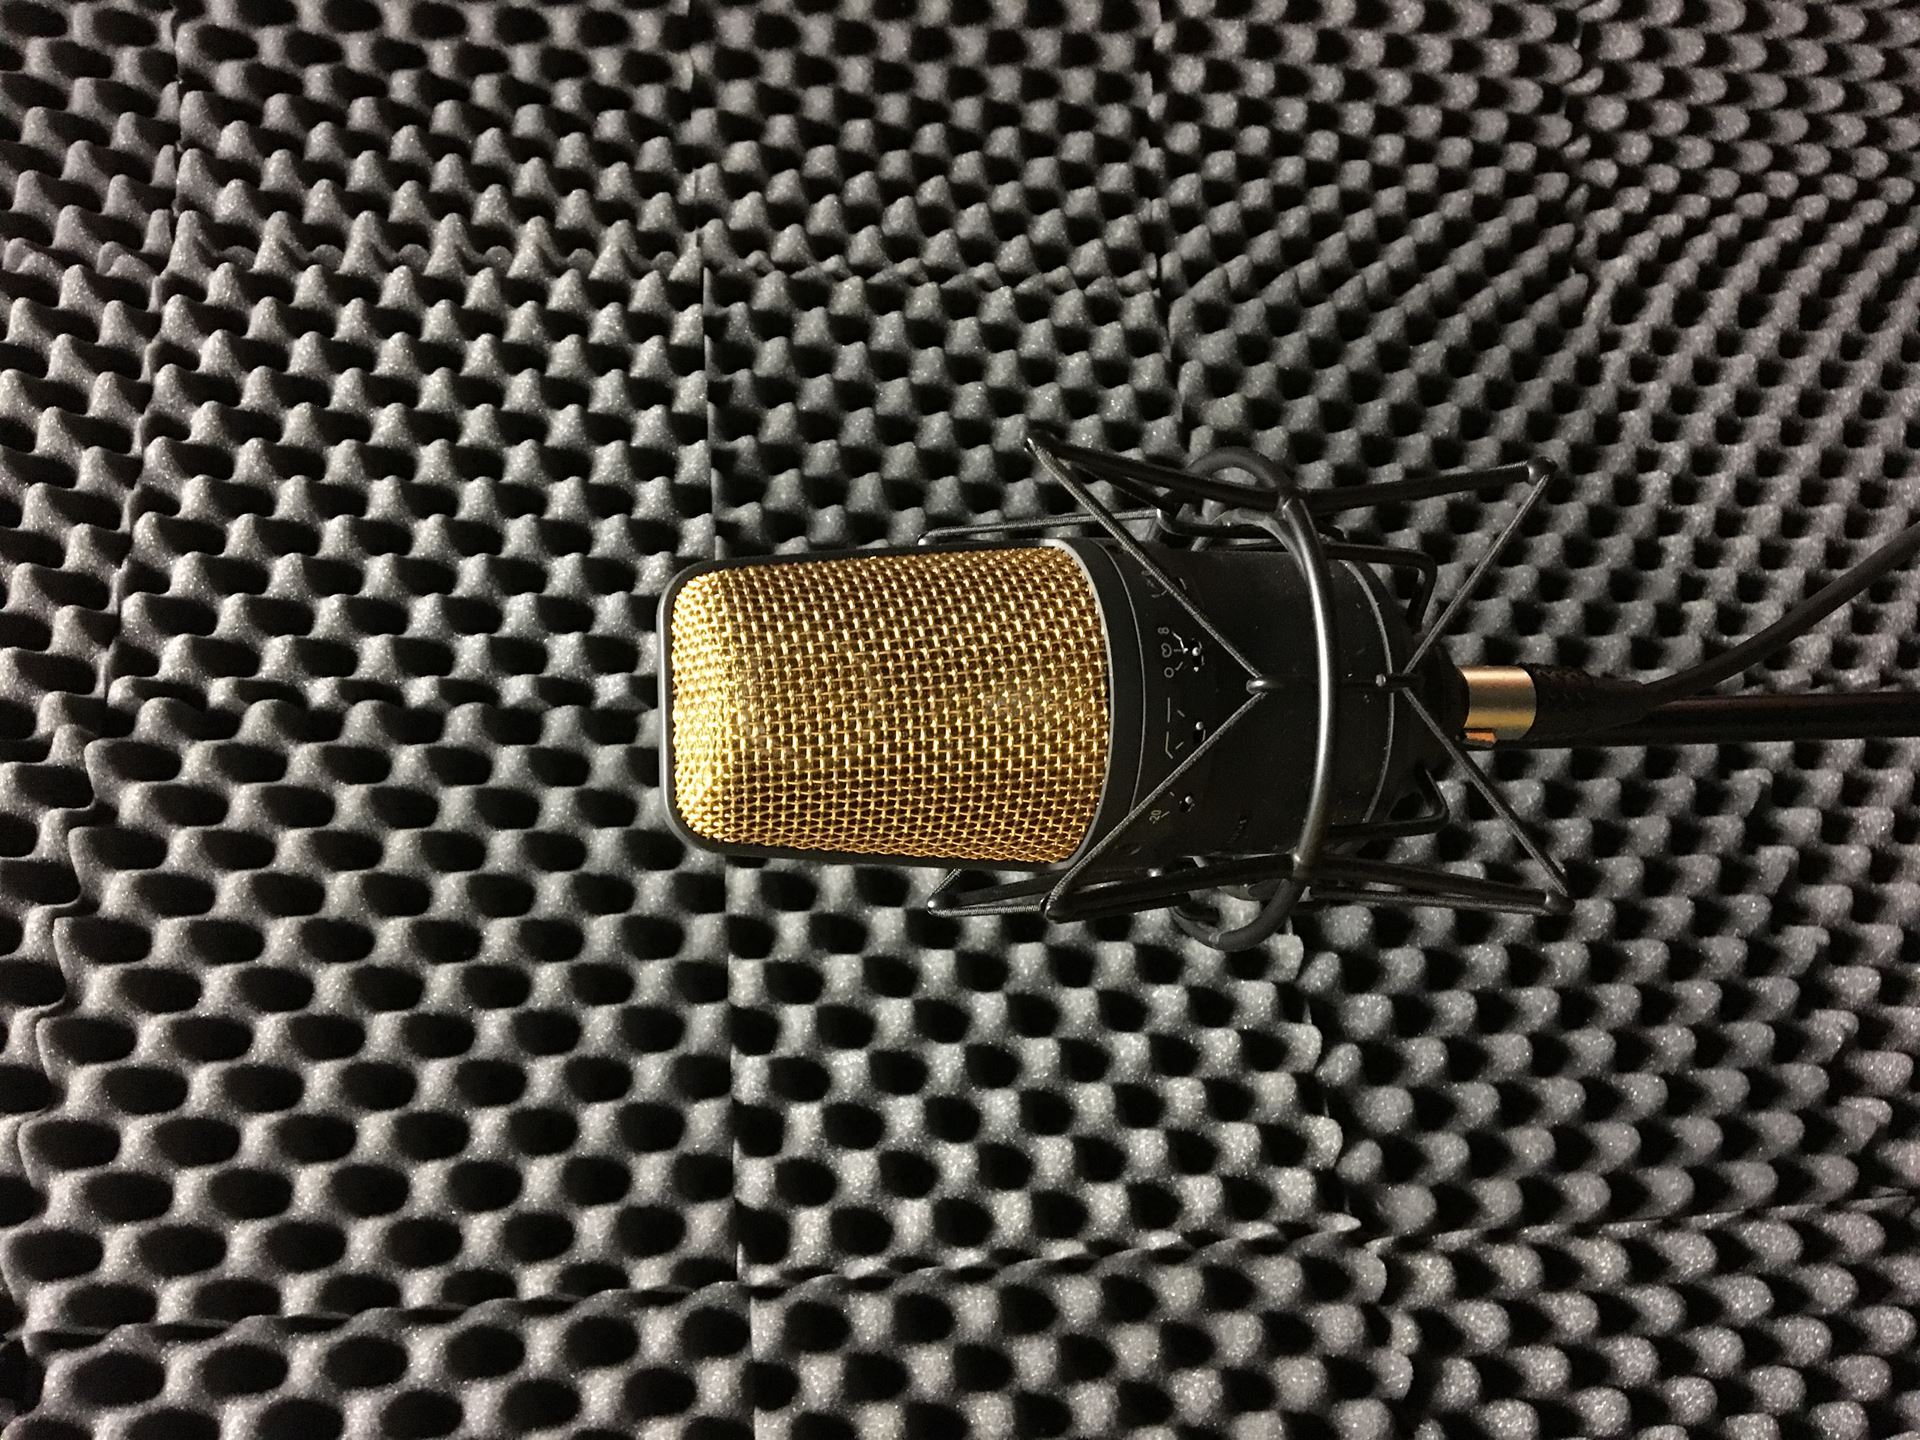 condenser microphone in front of acoustic foam